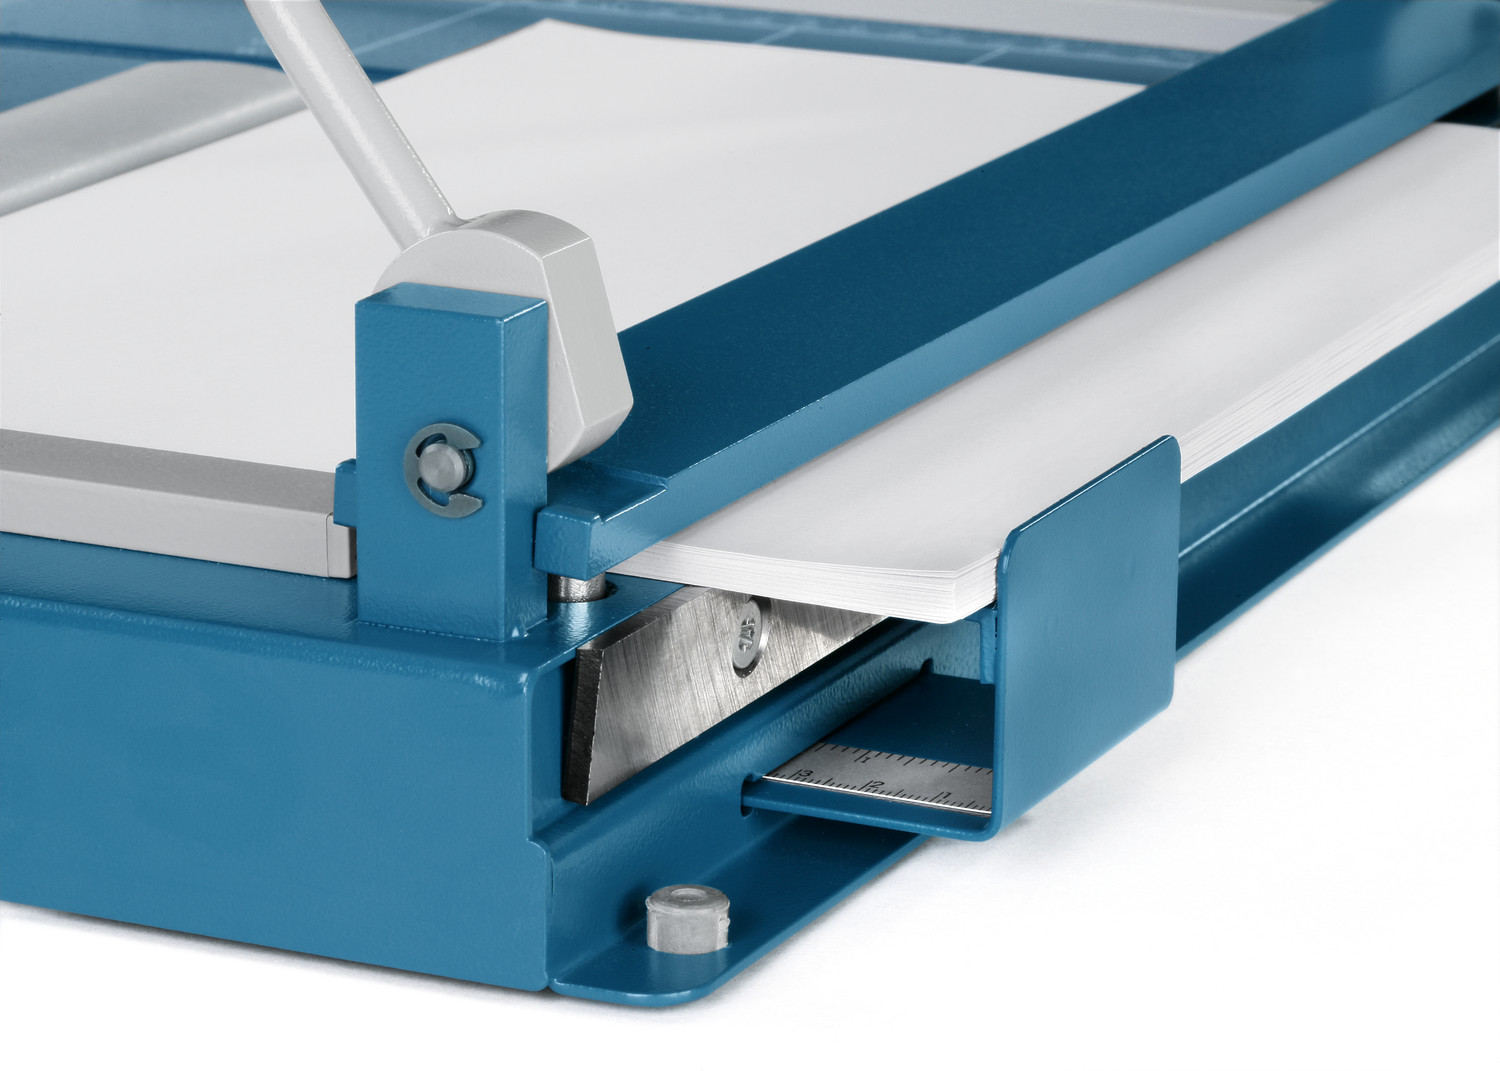 Powerful performance from Dahle model 564 for cutting up to 50 sheets